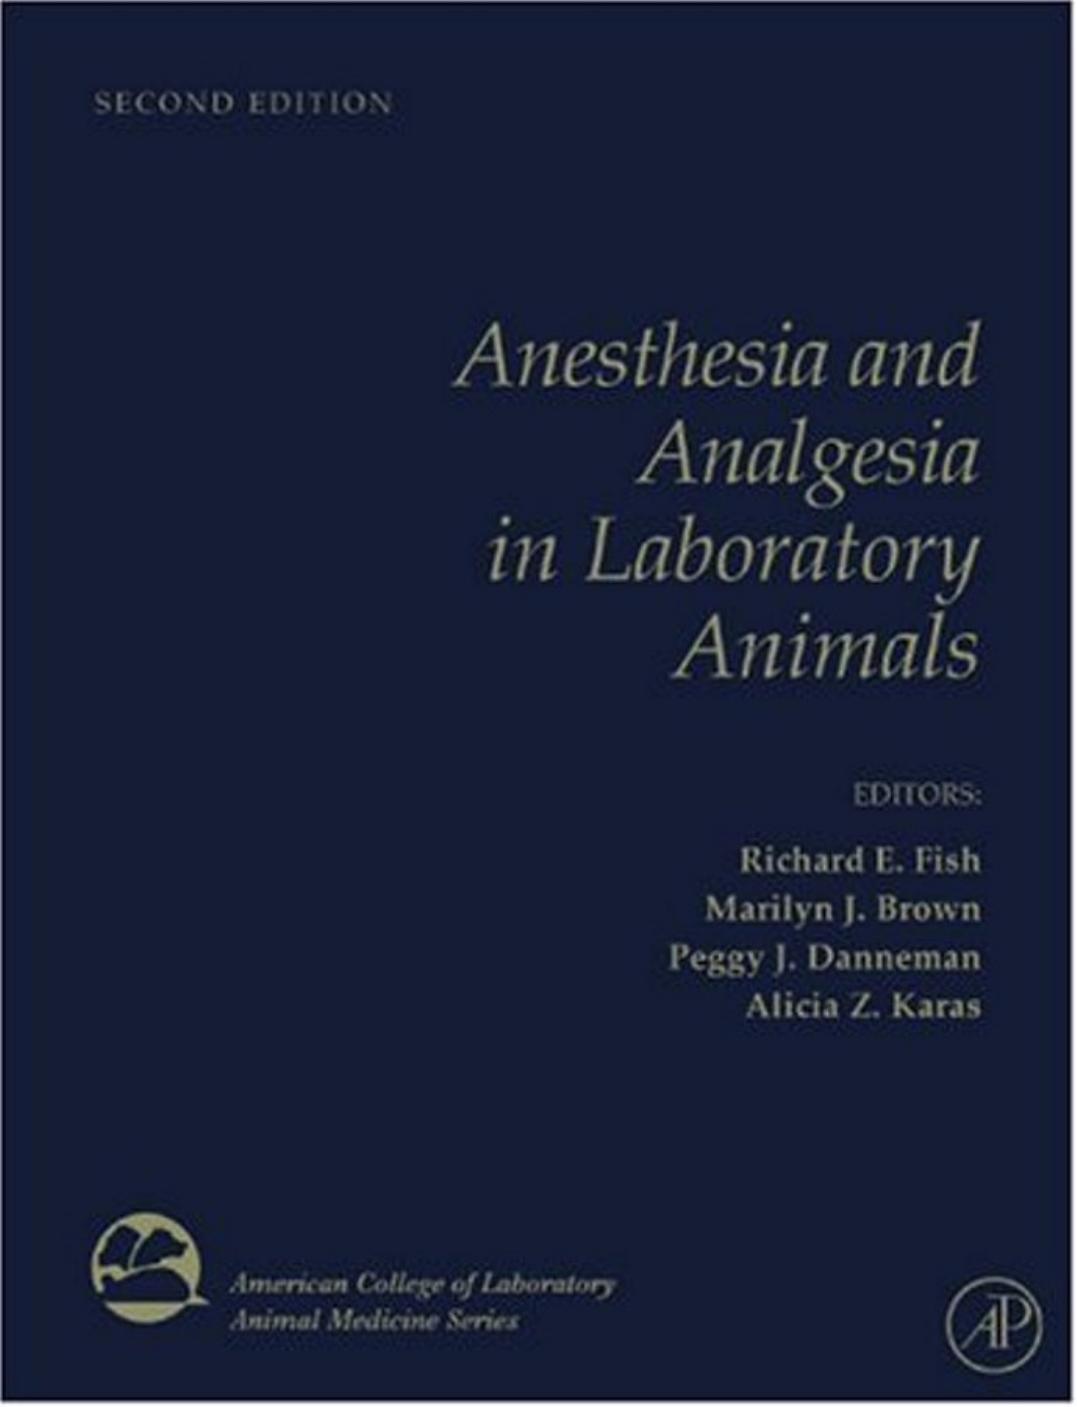 Anesthesia and Analgesia in Laboratory Animals (3) 2008